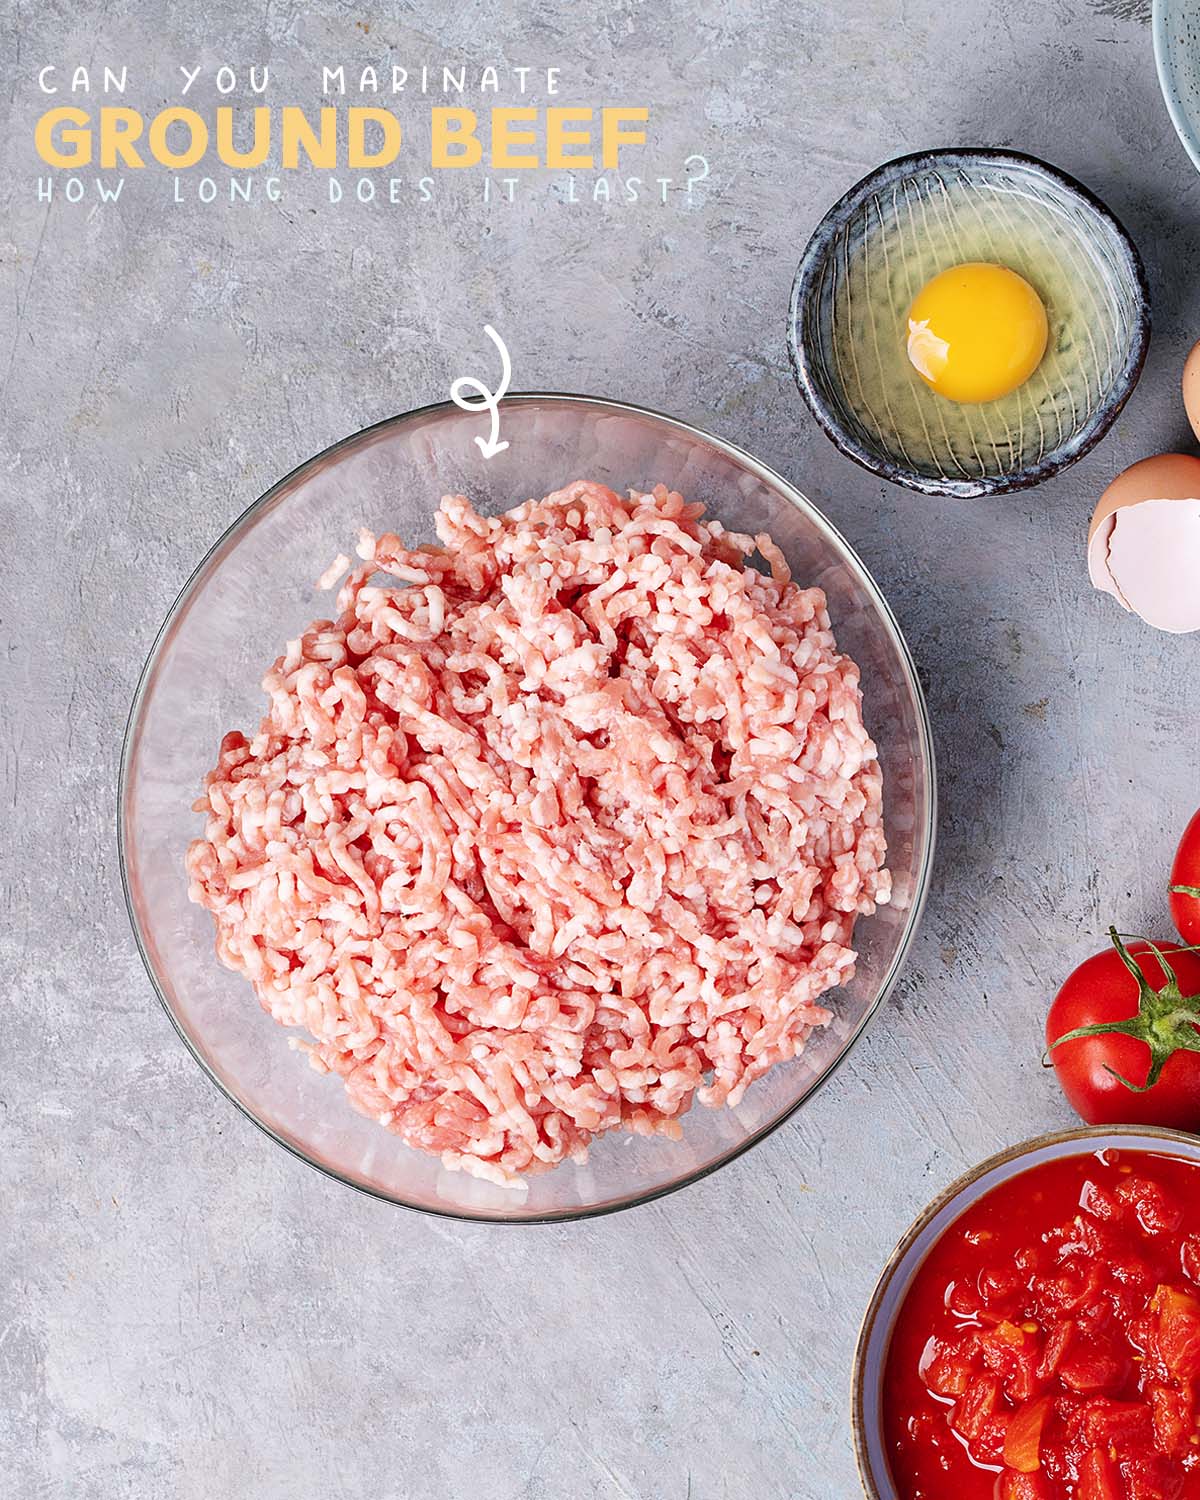 Marinating ground beef is a simple way to add flavor and make it more tender. You can marinate any ground, although leaner cuts will benefit more from the tenderizing effect of the marinade.